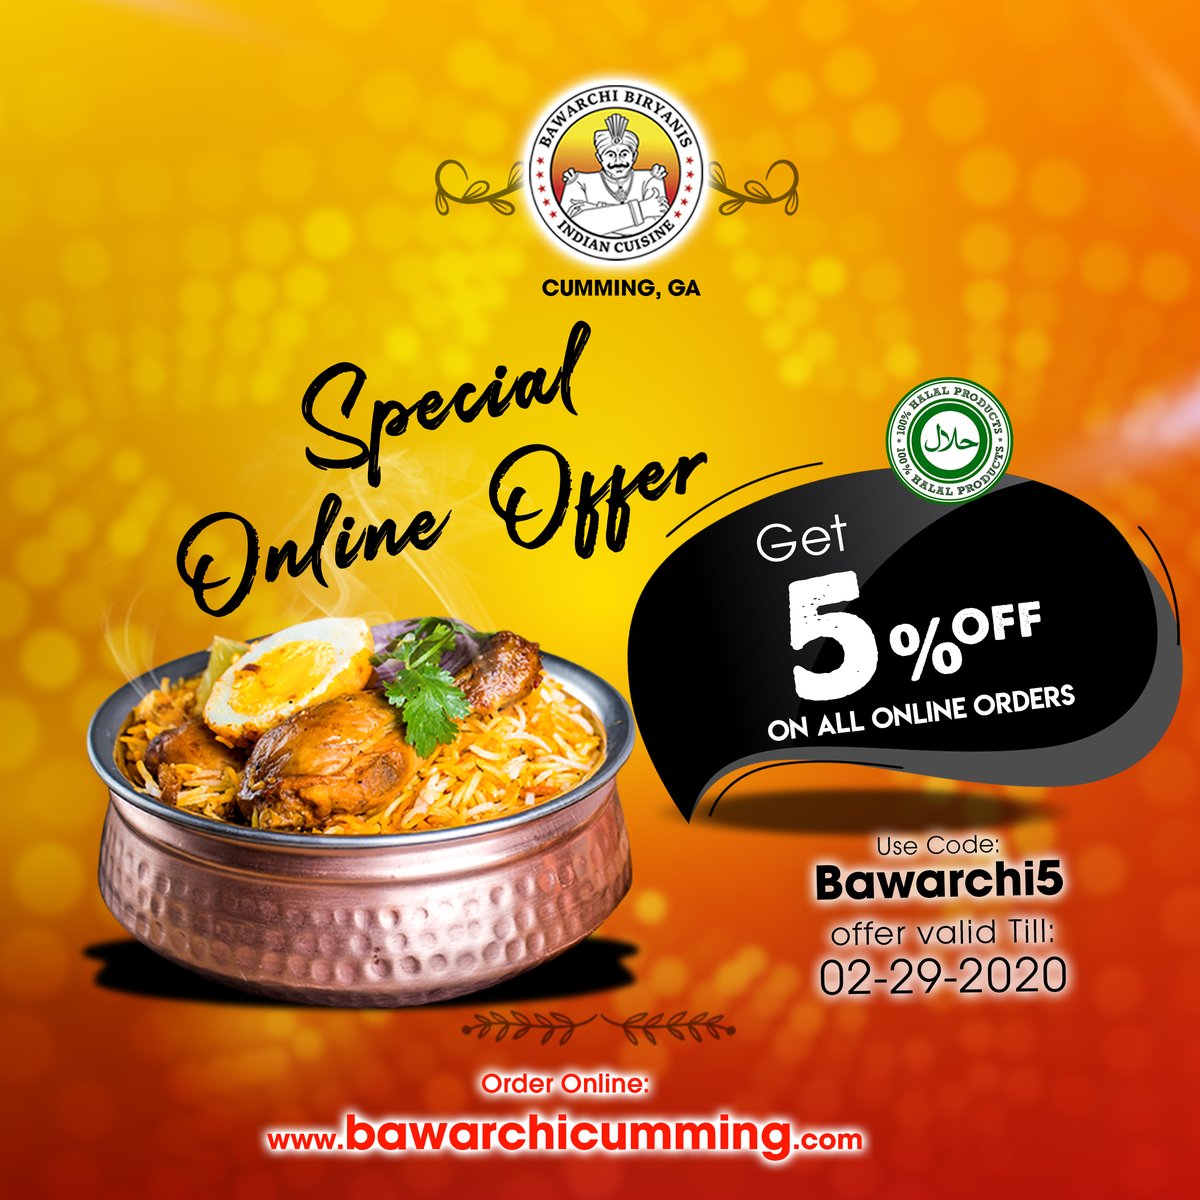 Walk-in and experience the taste of authentic Indian cuisine😋😍
Order Online📲: bawarchicumming.com

#BawarchiCumming #BawarchiBiryanis #SouthIndianRestaurant #AndhraSpecialBiryani #OrderOnline #Muttonliver #yummy #dinner #orderonlie #specialoffer #indiancuisine